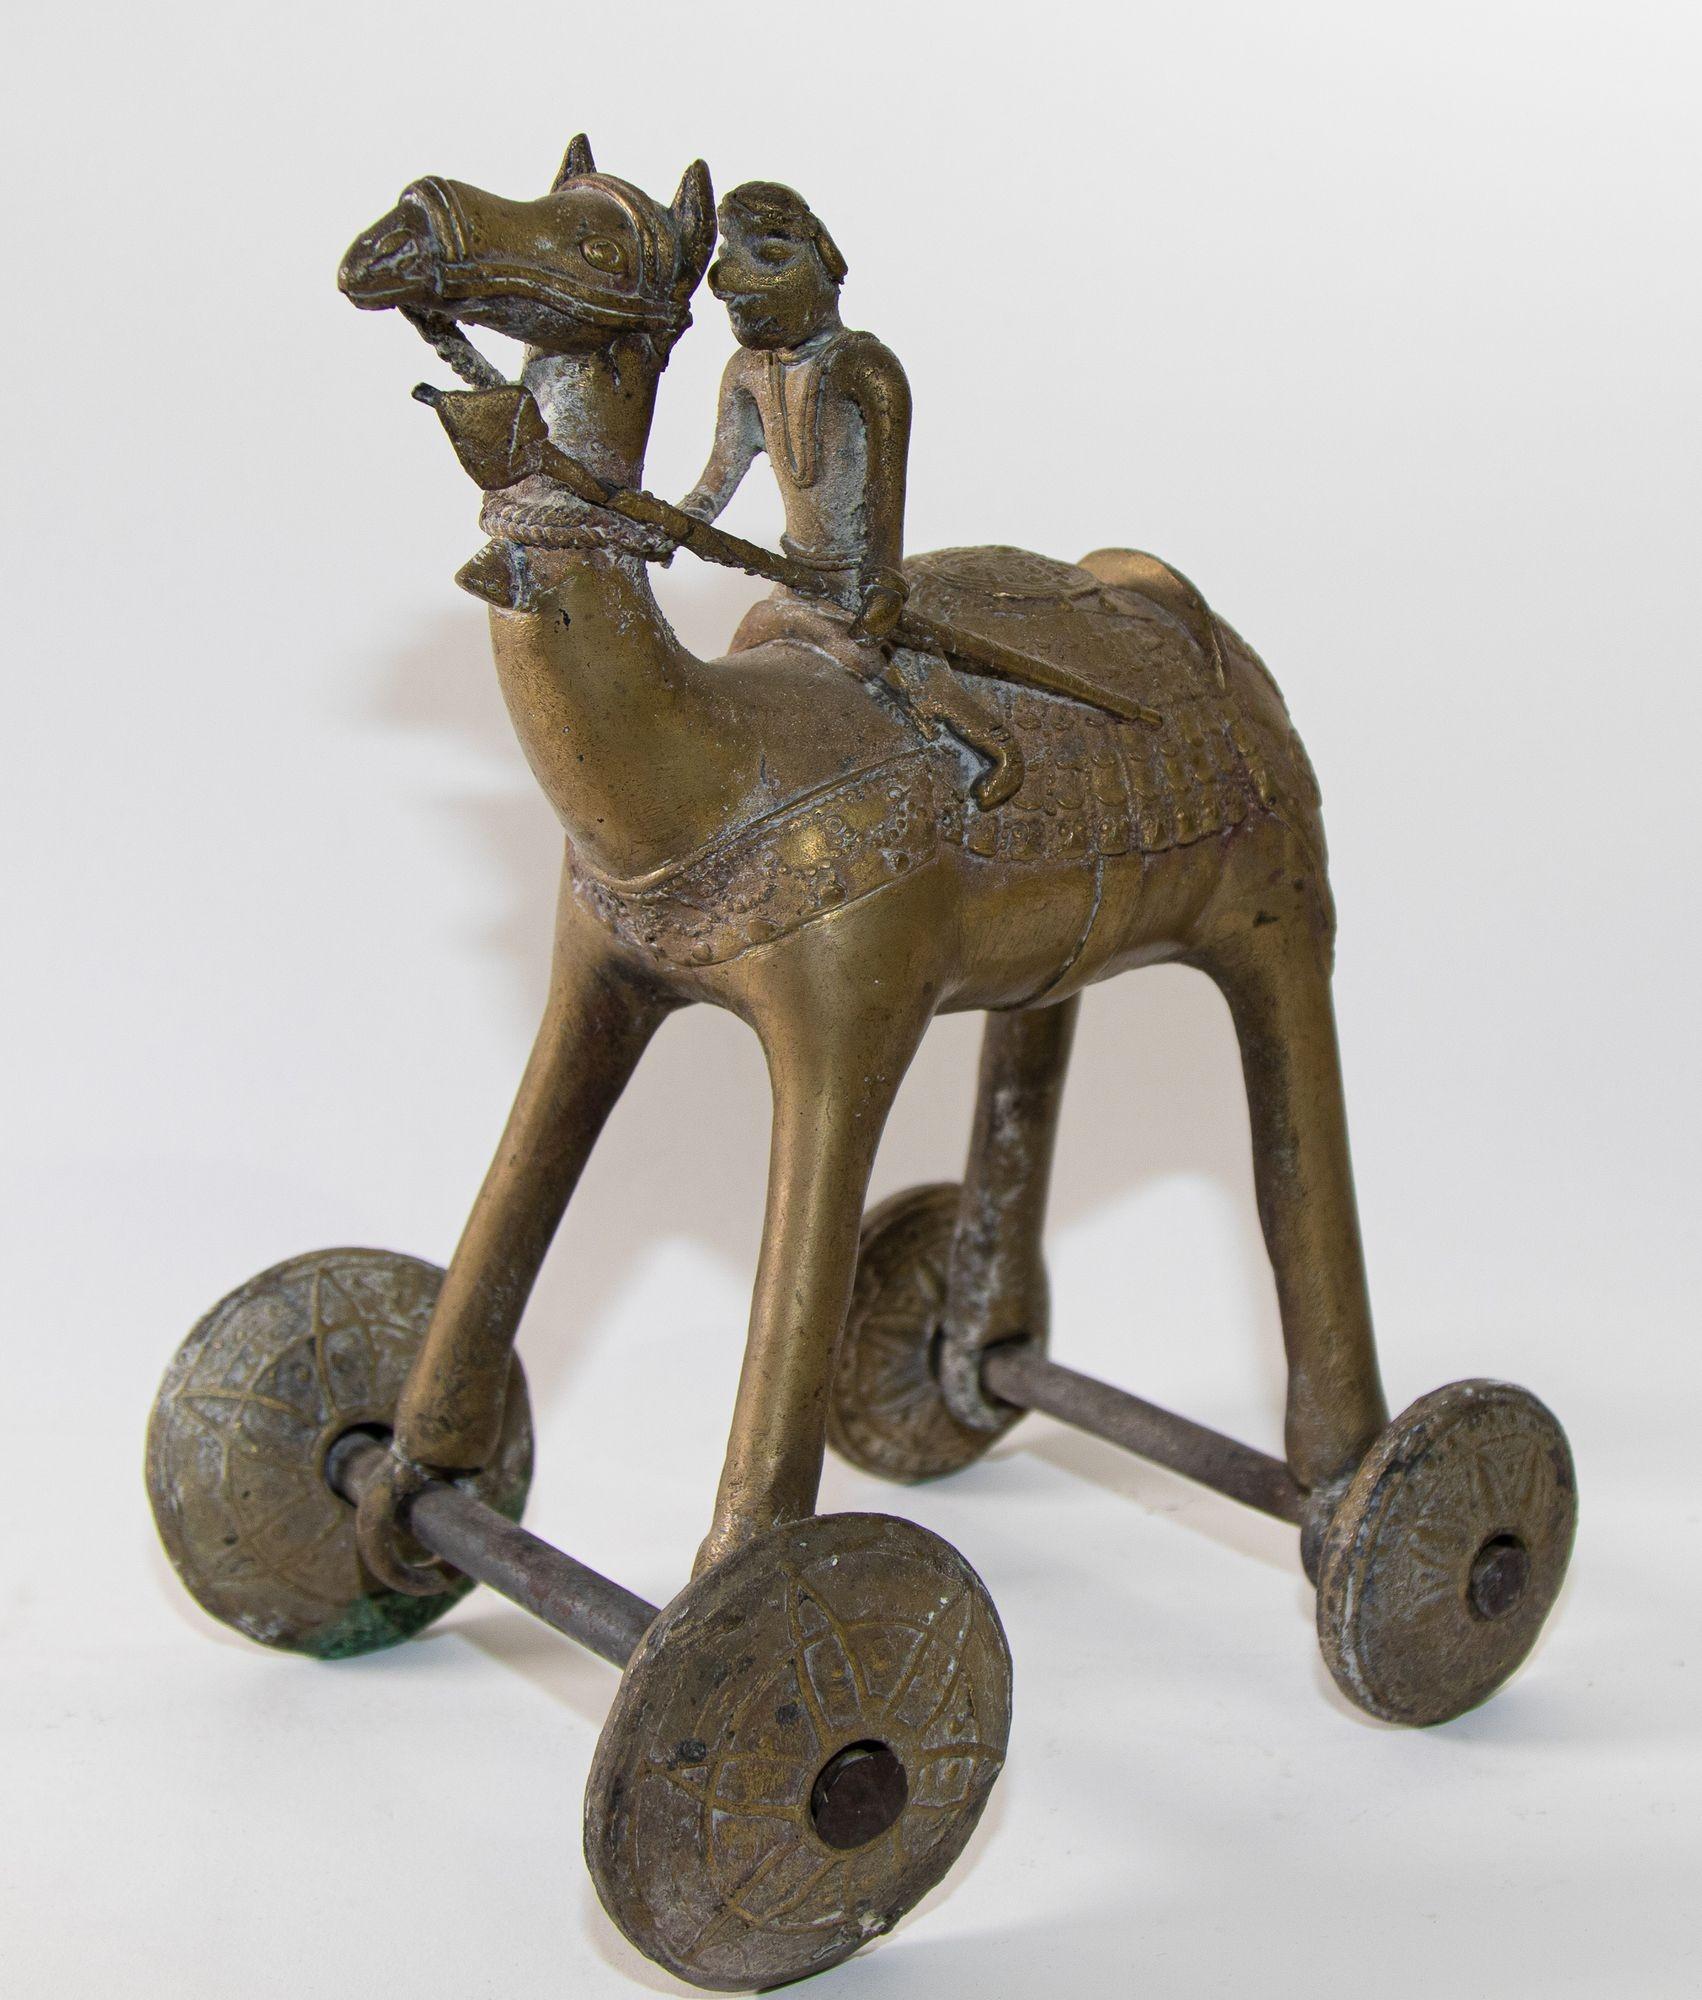 A scene from Ramakian or Ramayan, the Indian epic Rama and Sita.
Large and heavy Antique Indian Temple toy metal camel, bronze camel on wheels.
Camel with rider on wheels, beautiful metal children's toy sculpture.
Large sized (11